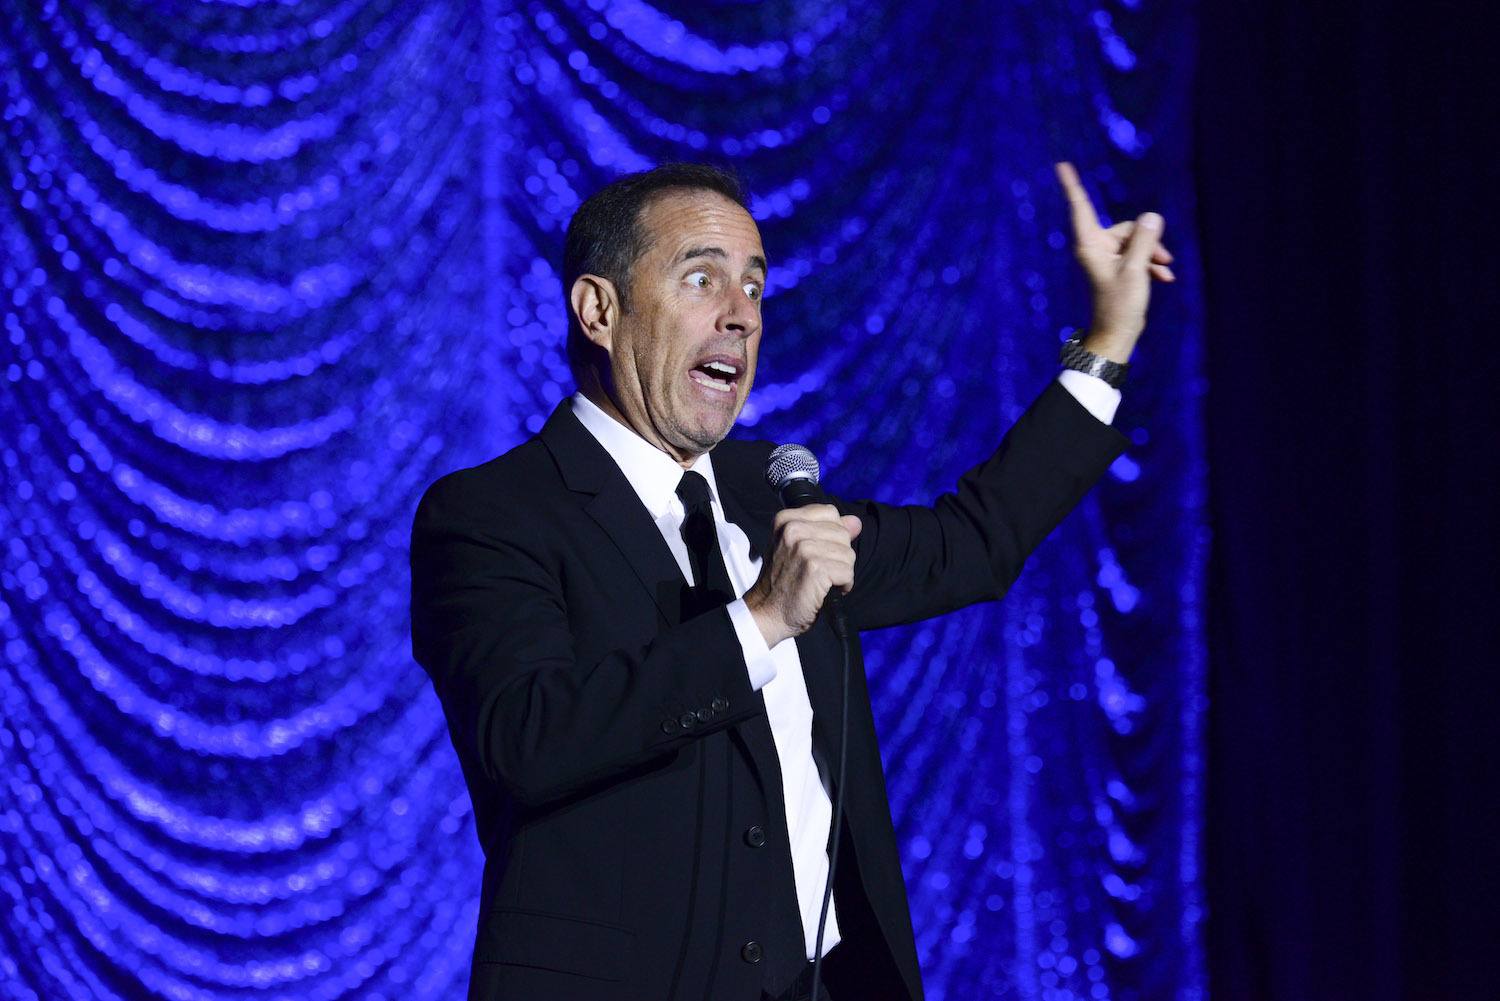 Jerry Seinfeld performs during Philly Fights Cancer: Round 4 at The Philadelphia Navy Yard on November 10, 2018 in Philadelphia, Pennsylvania.